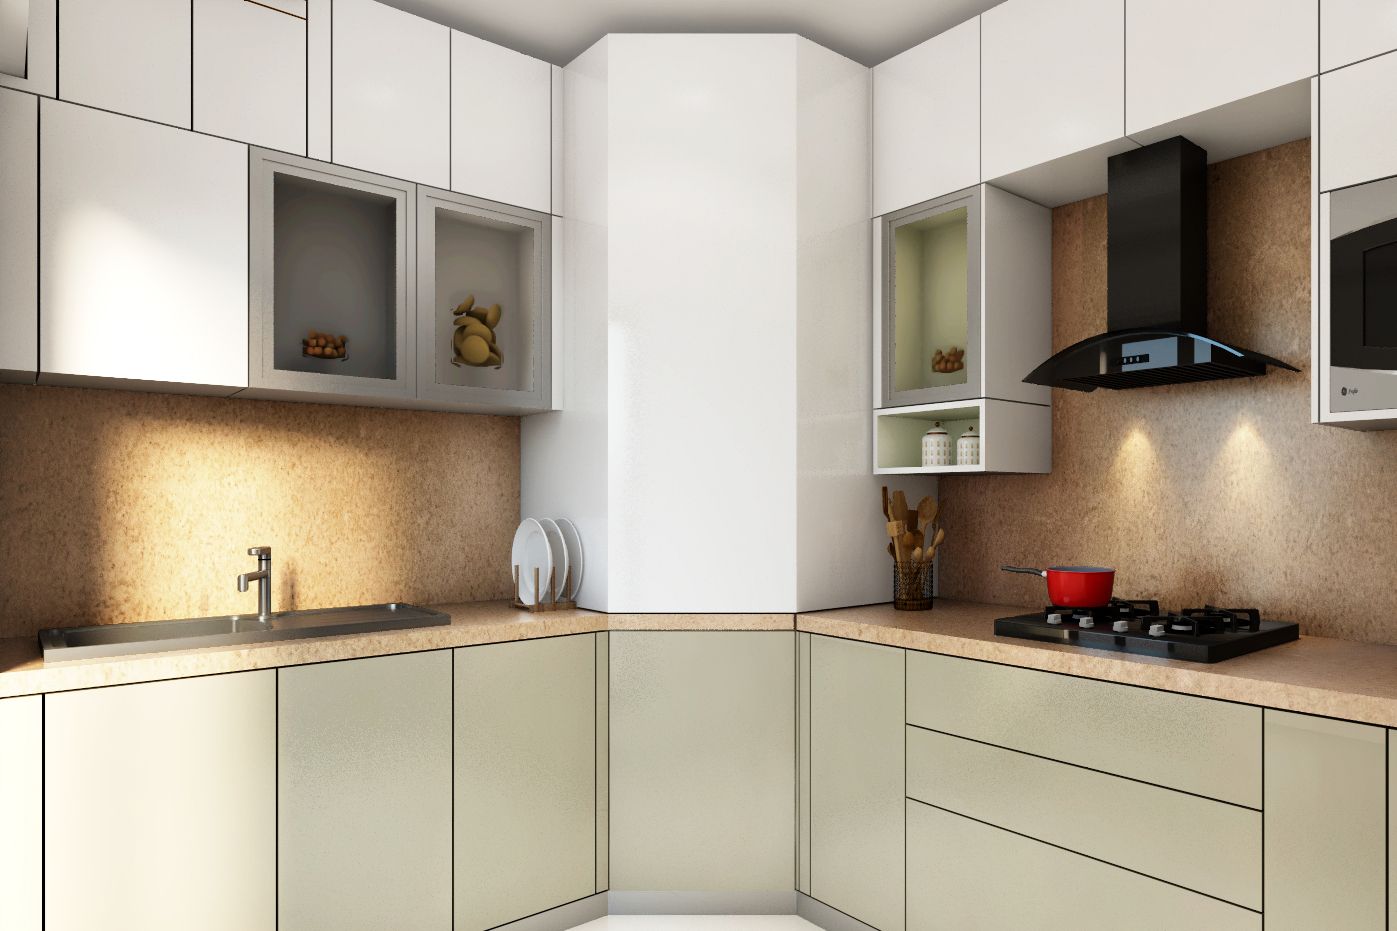 Contemporary L-Shaped Kitchen Design With Cove Lighting